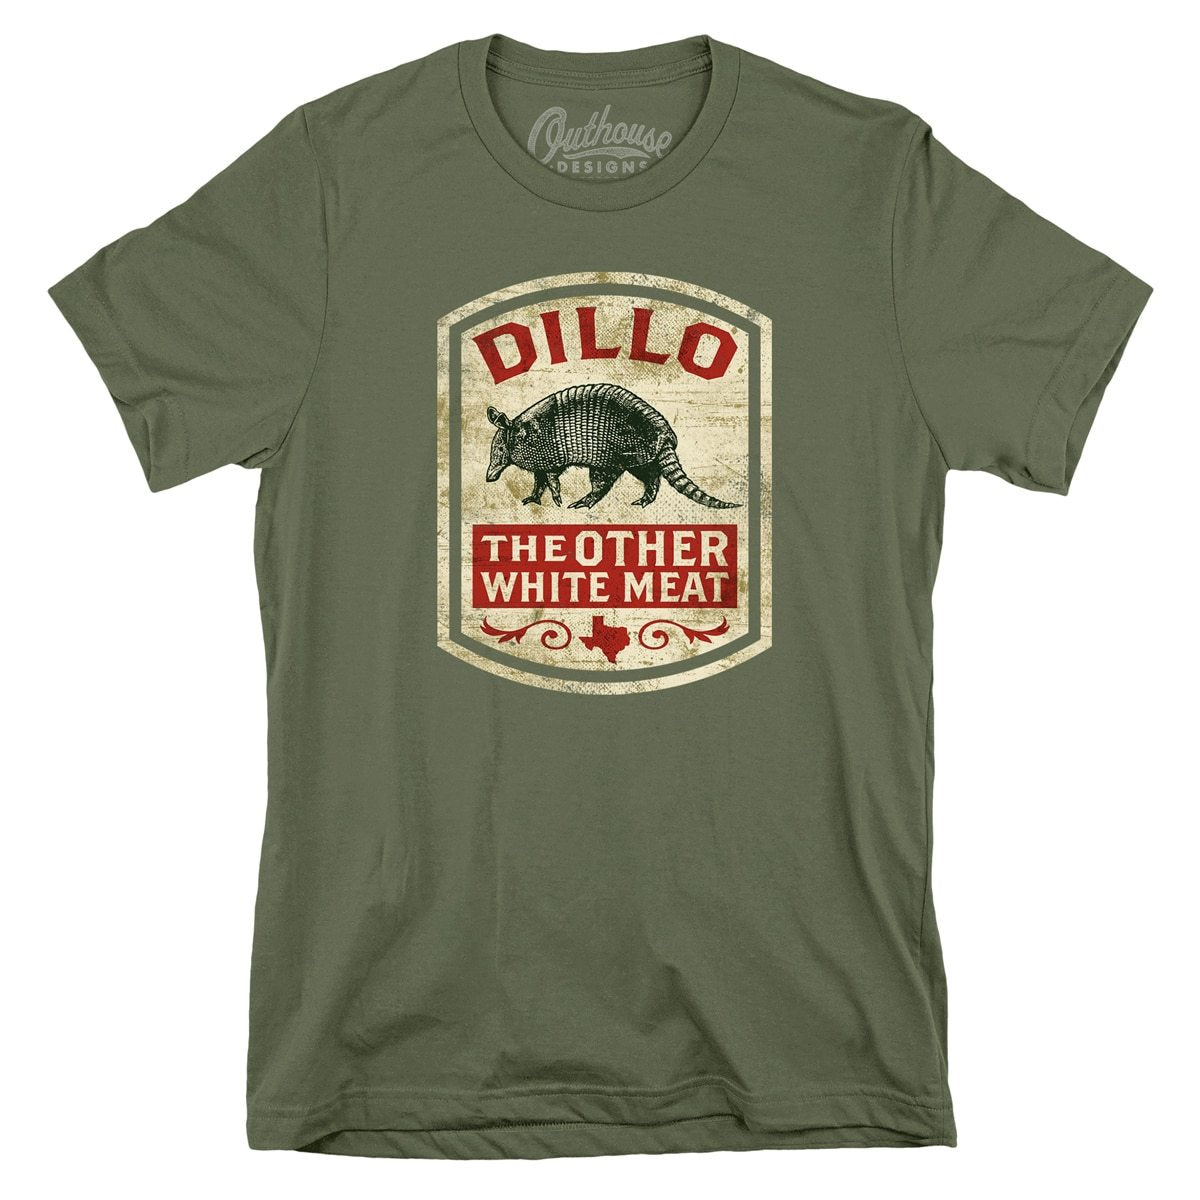 Dillo Other White Meat Tee